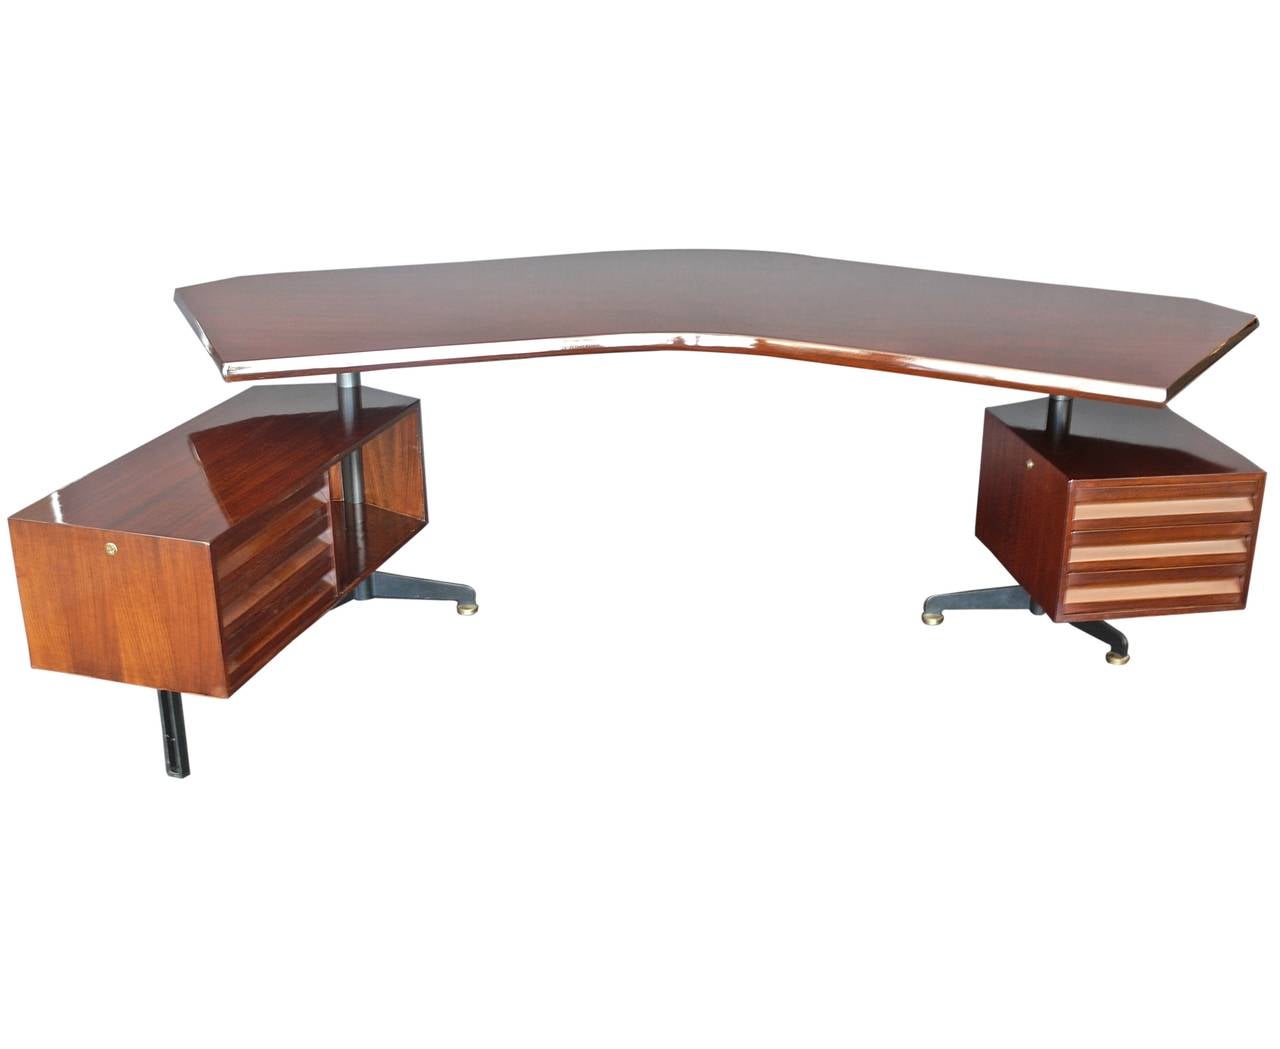 Incredible executive desk designed by Osvaldo Borsani for Tecno. Large rosewood boomerang top with black steel legs and floating adjustable drawers on both sides. Both the floating pedestal and long return swivel 360 degrees. Newly refinished to